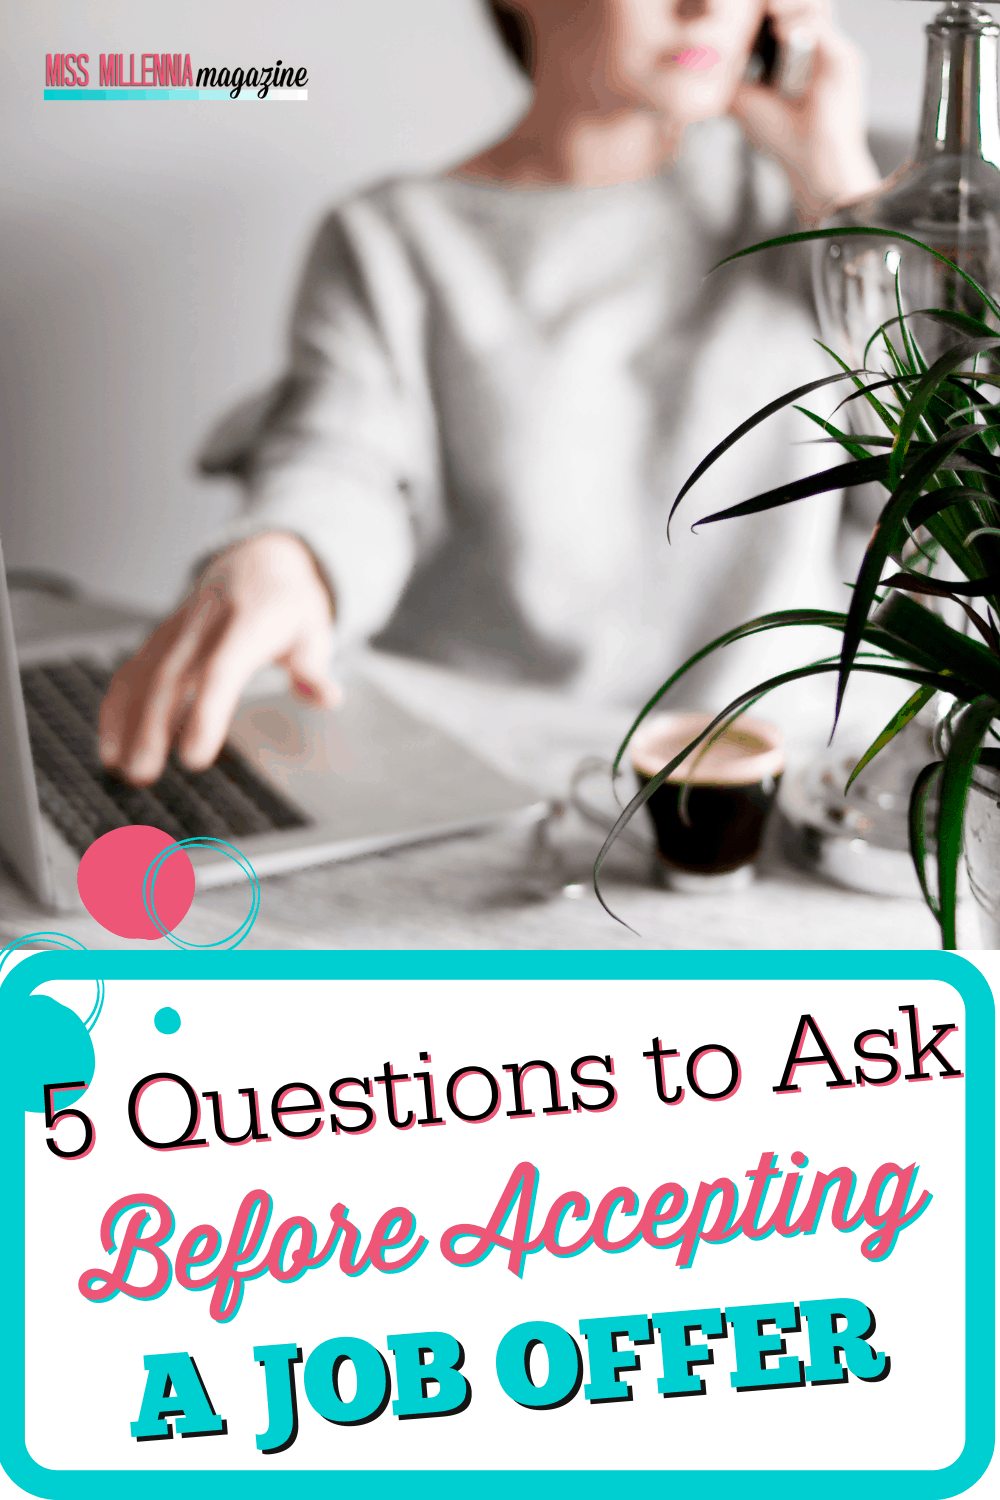 5 Questions to Ask Before Accepting a Job Offer